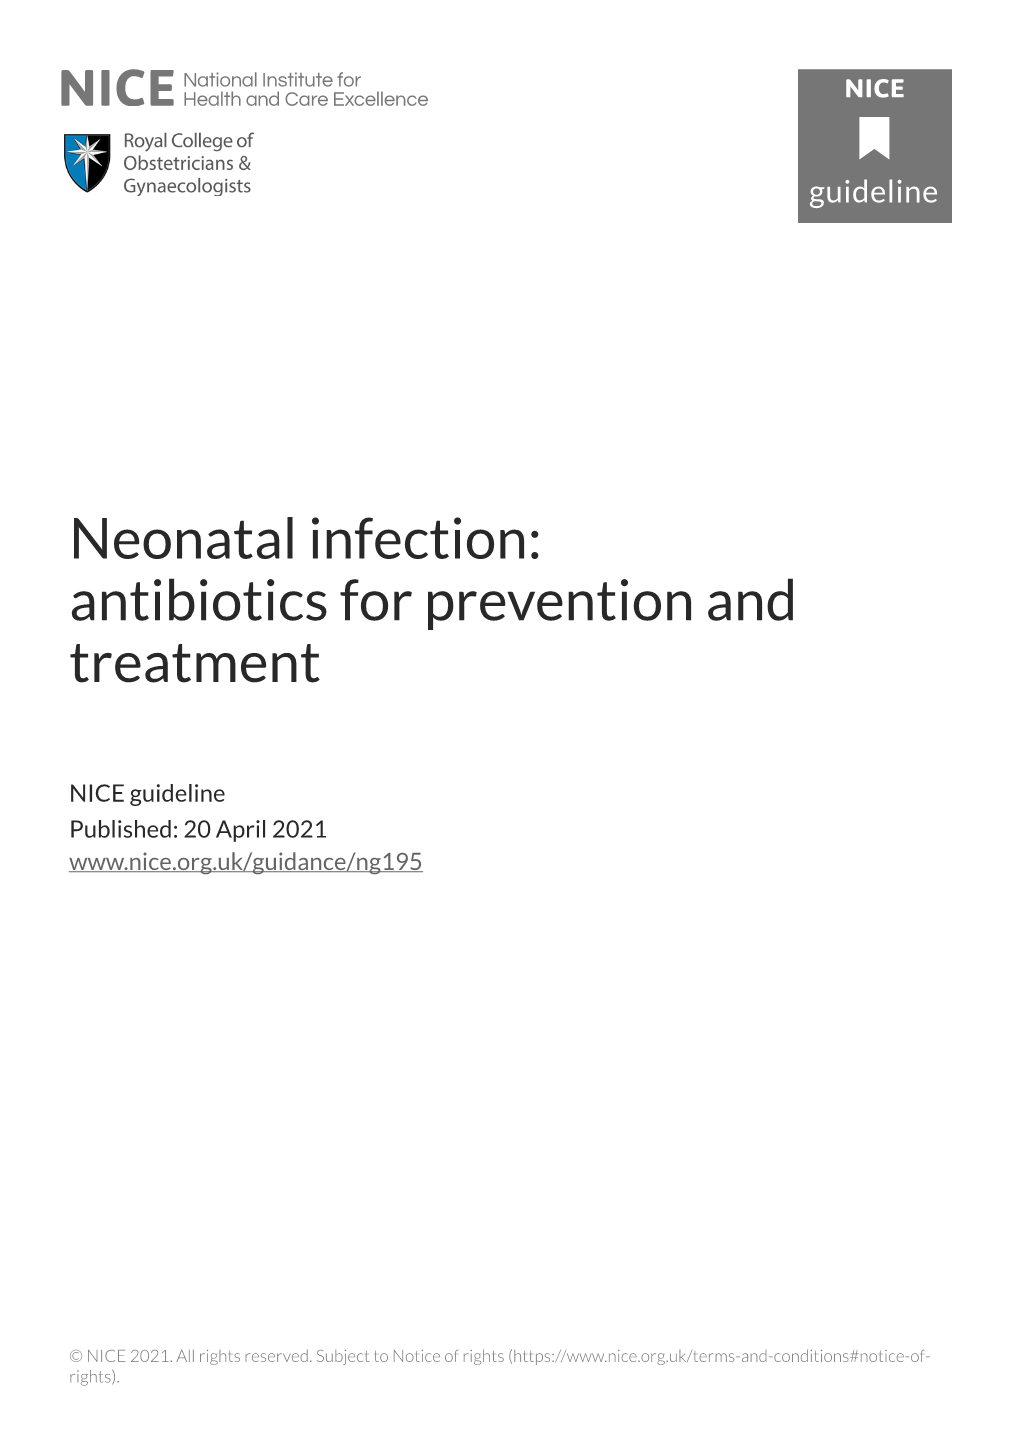 Neonatal Infection: Antibiotics for Prevention and Treatment